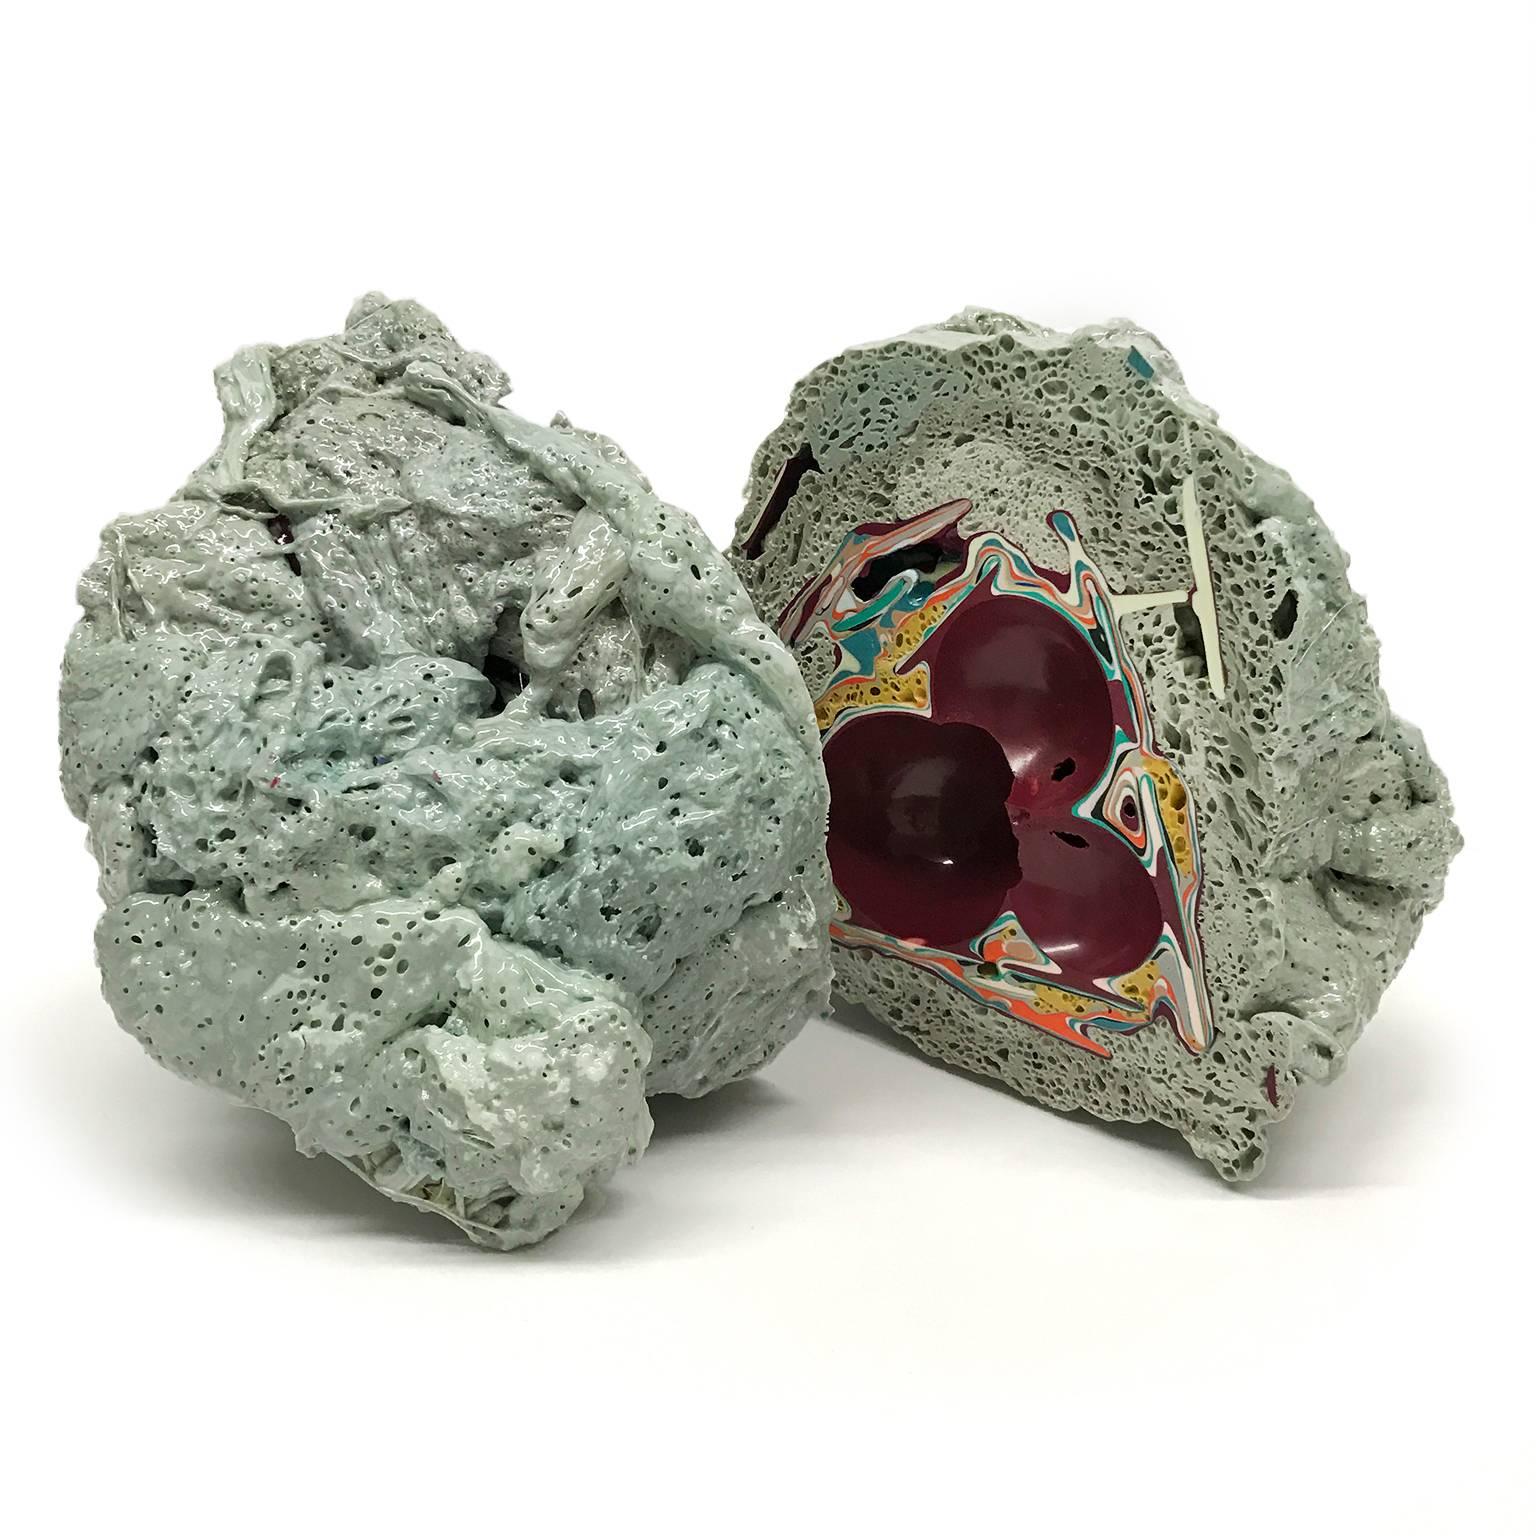 Resin Unique Handmade Geode Sculpture in Burgundy and Sage Green For Sale